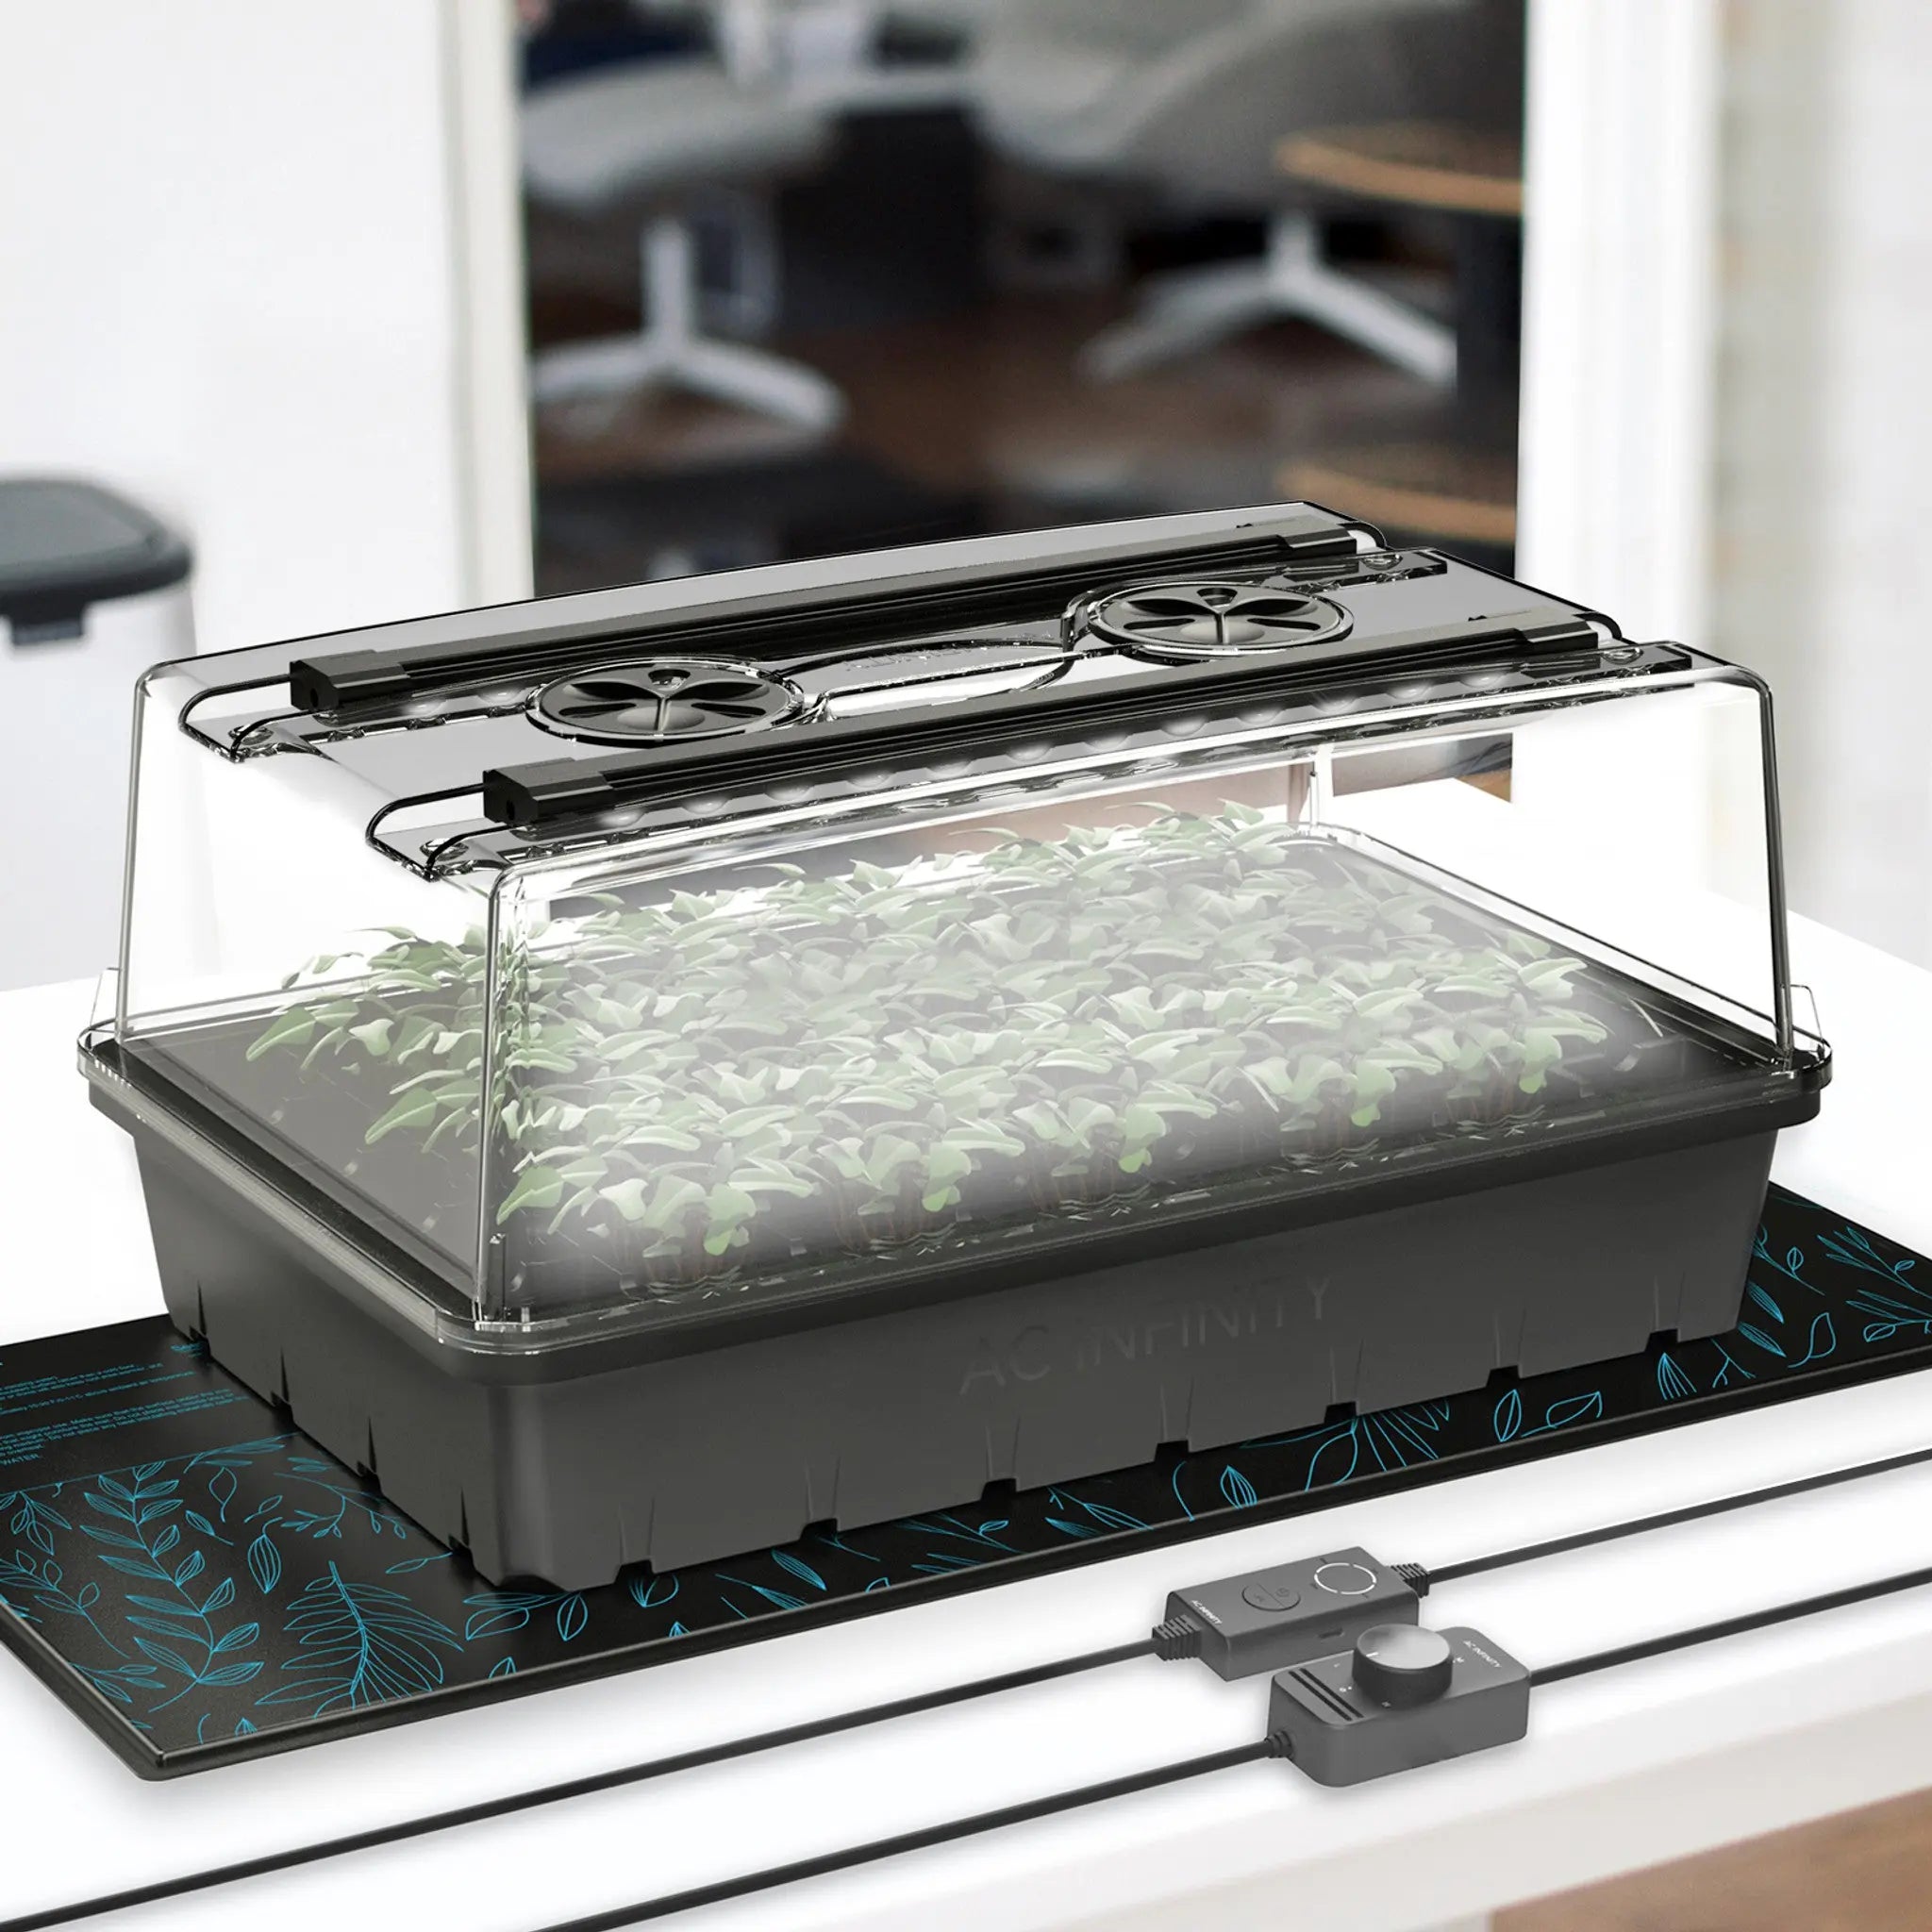 AC Infinity Germination Kit With Seedling Mat and LED Grow Light Bars, 5x8 Cell Tray